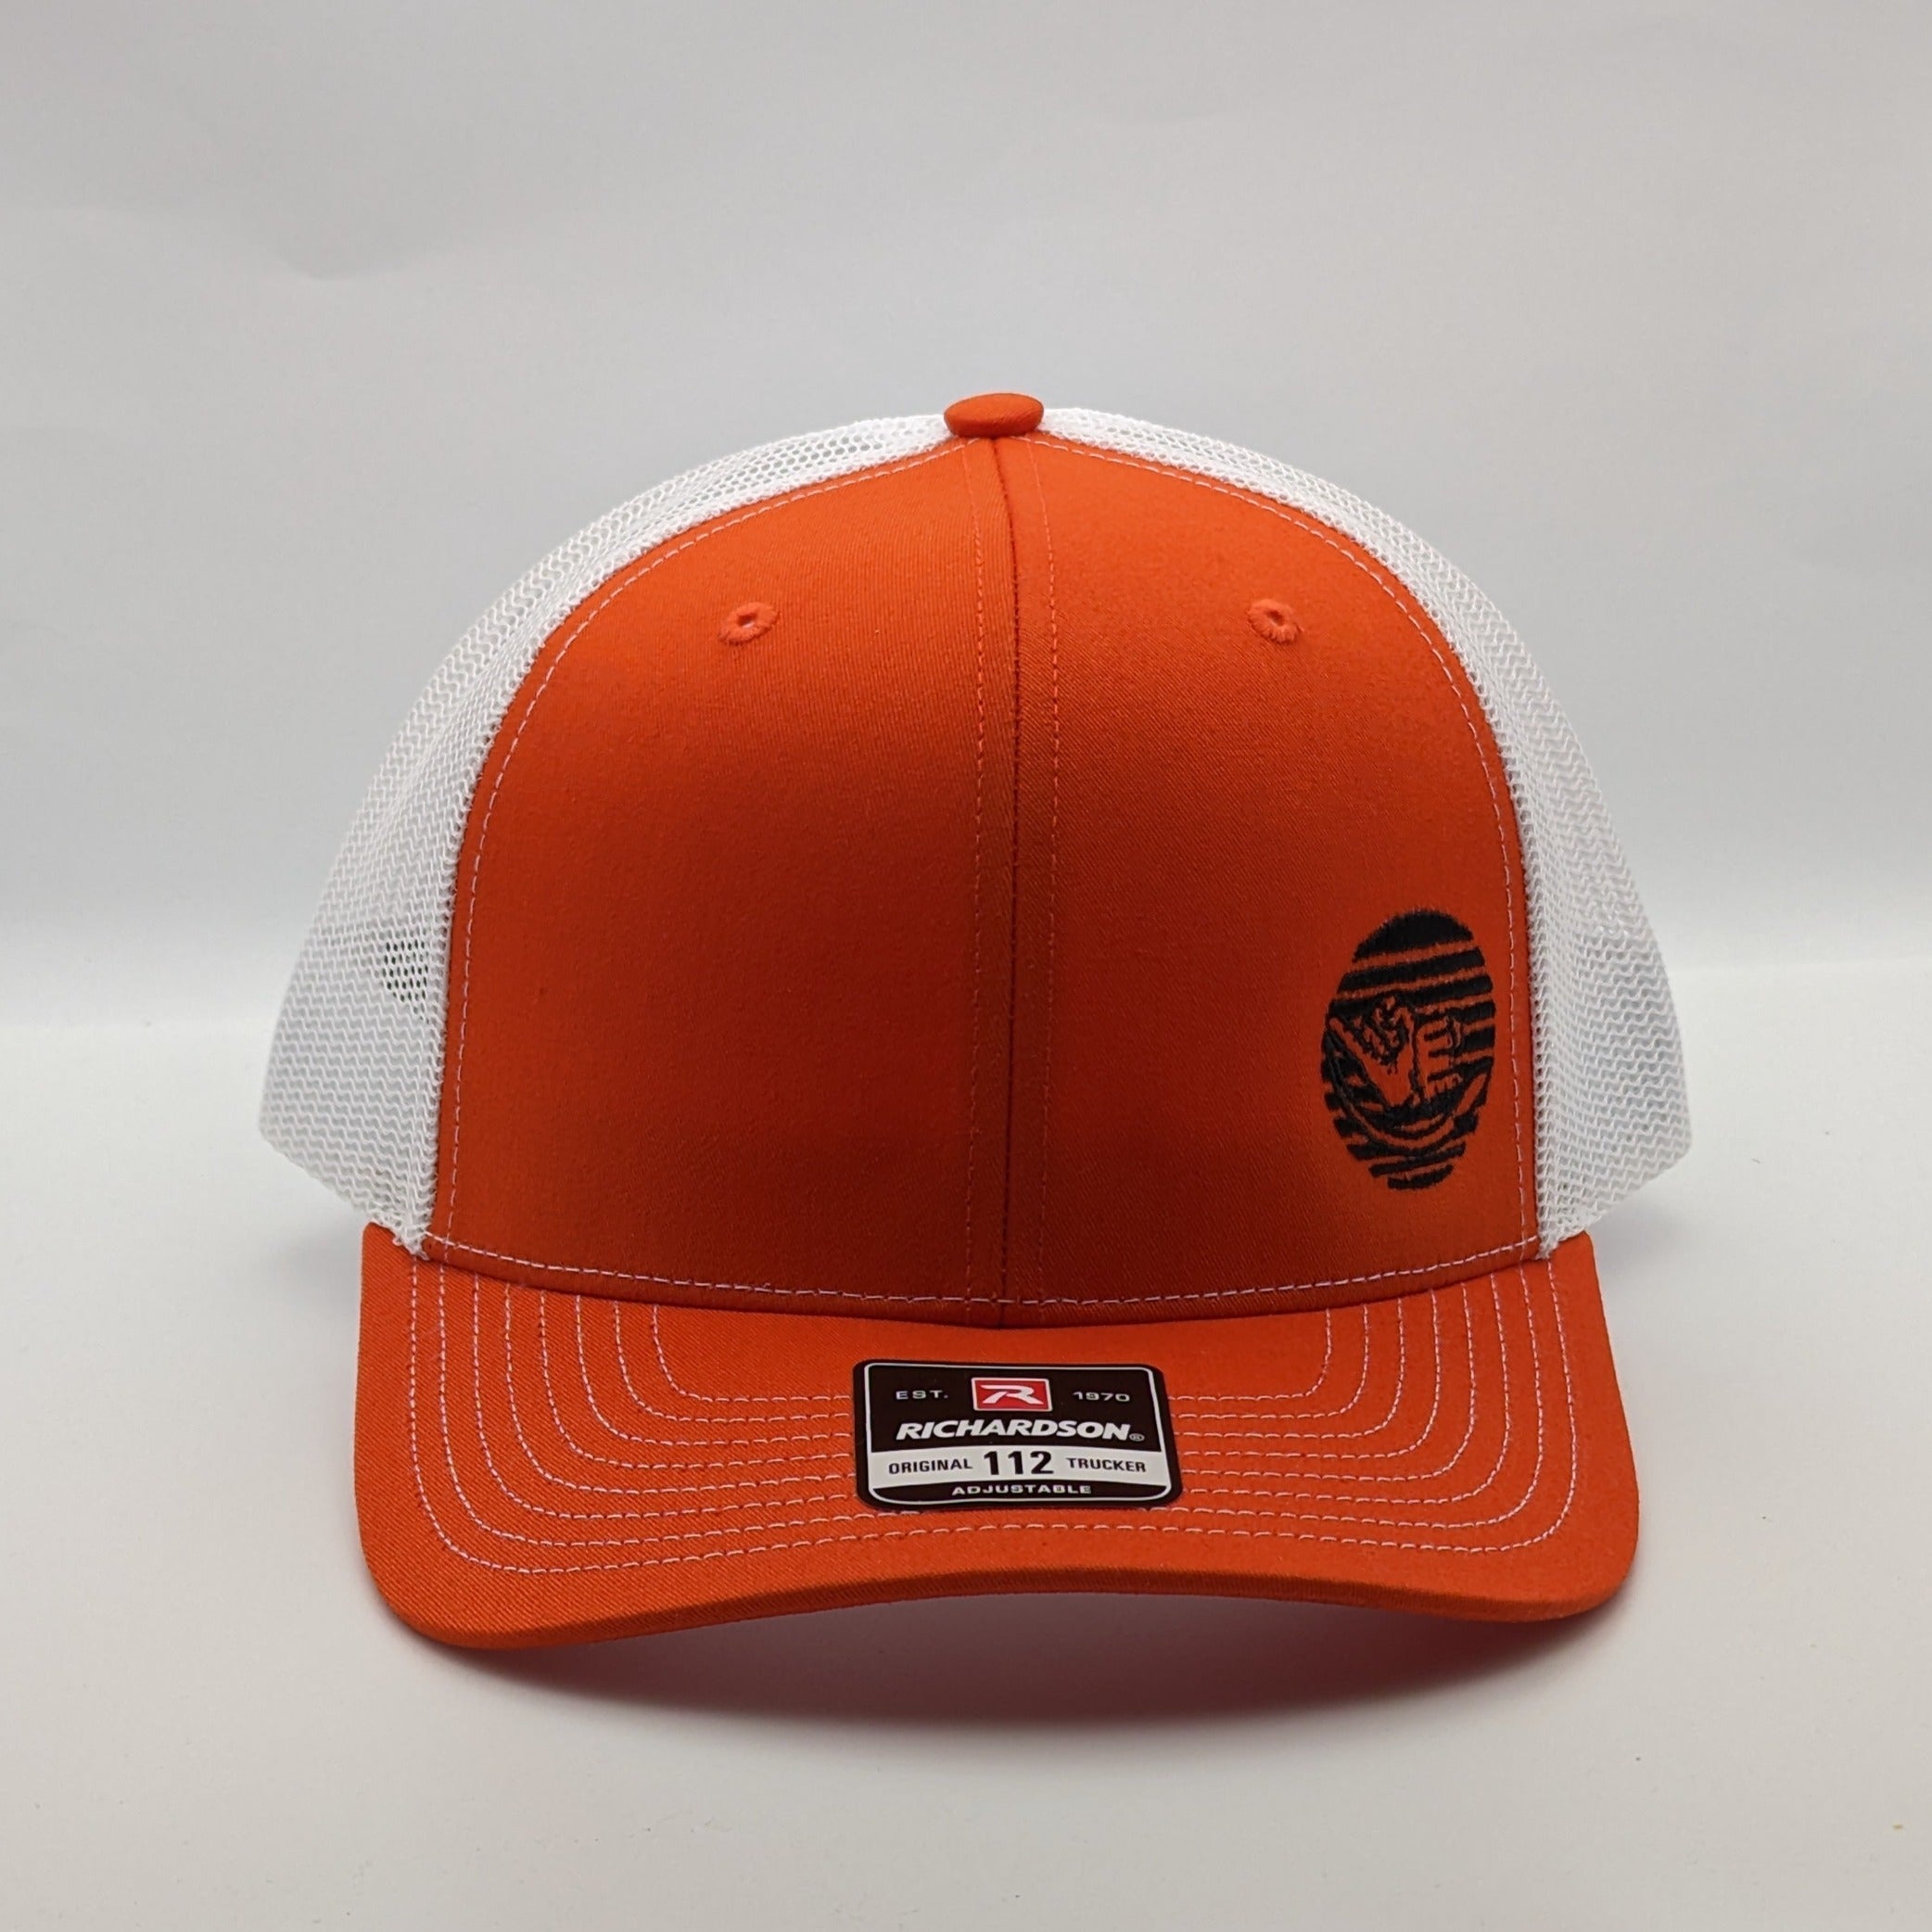 Richardson 112 Trucker Hat with Small Embroidered Jersey Discs Logo